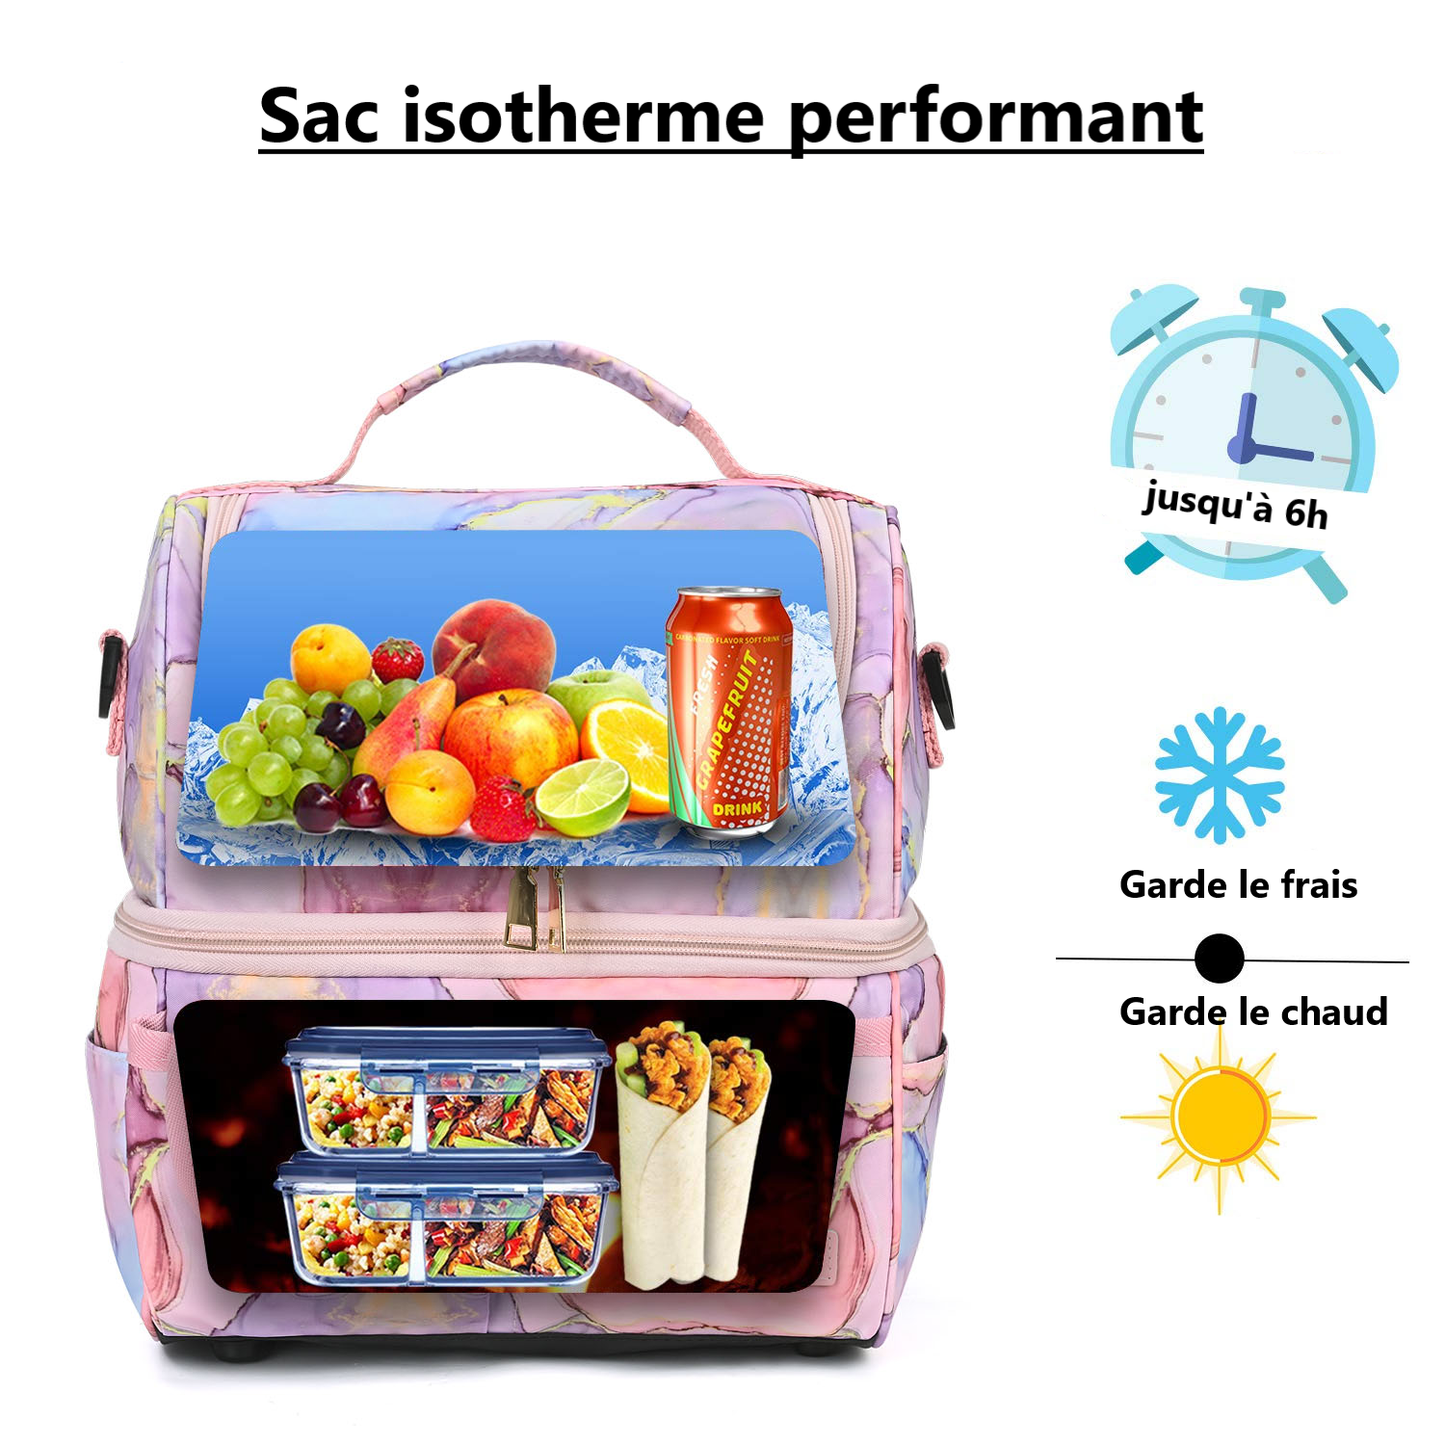 performance thermique grand sac isotherme